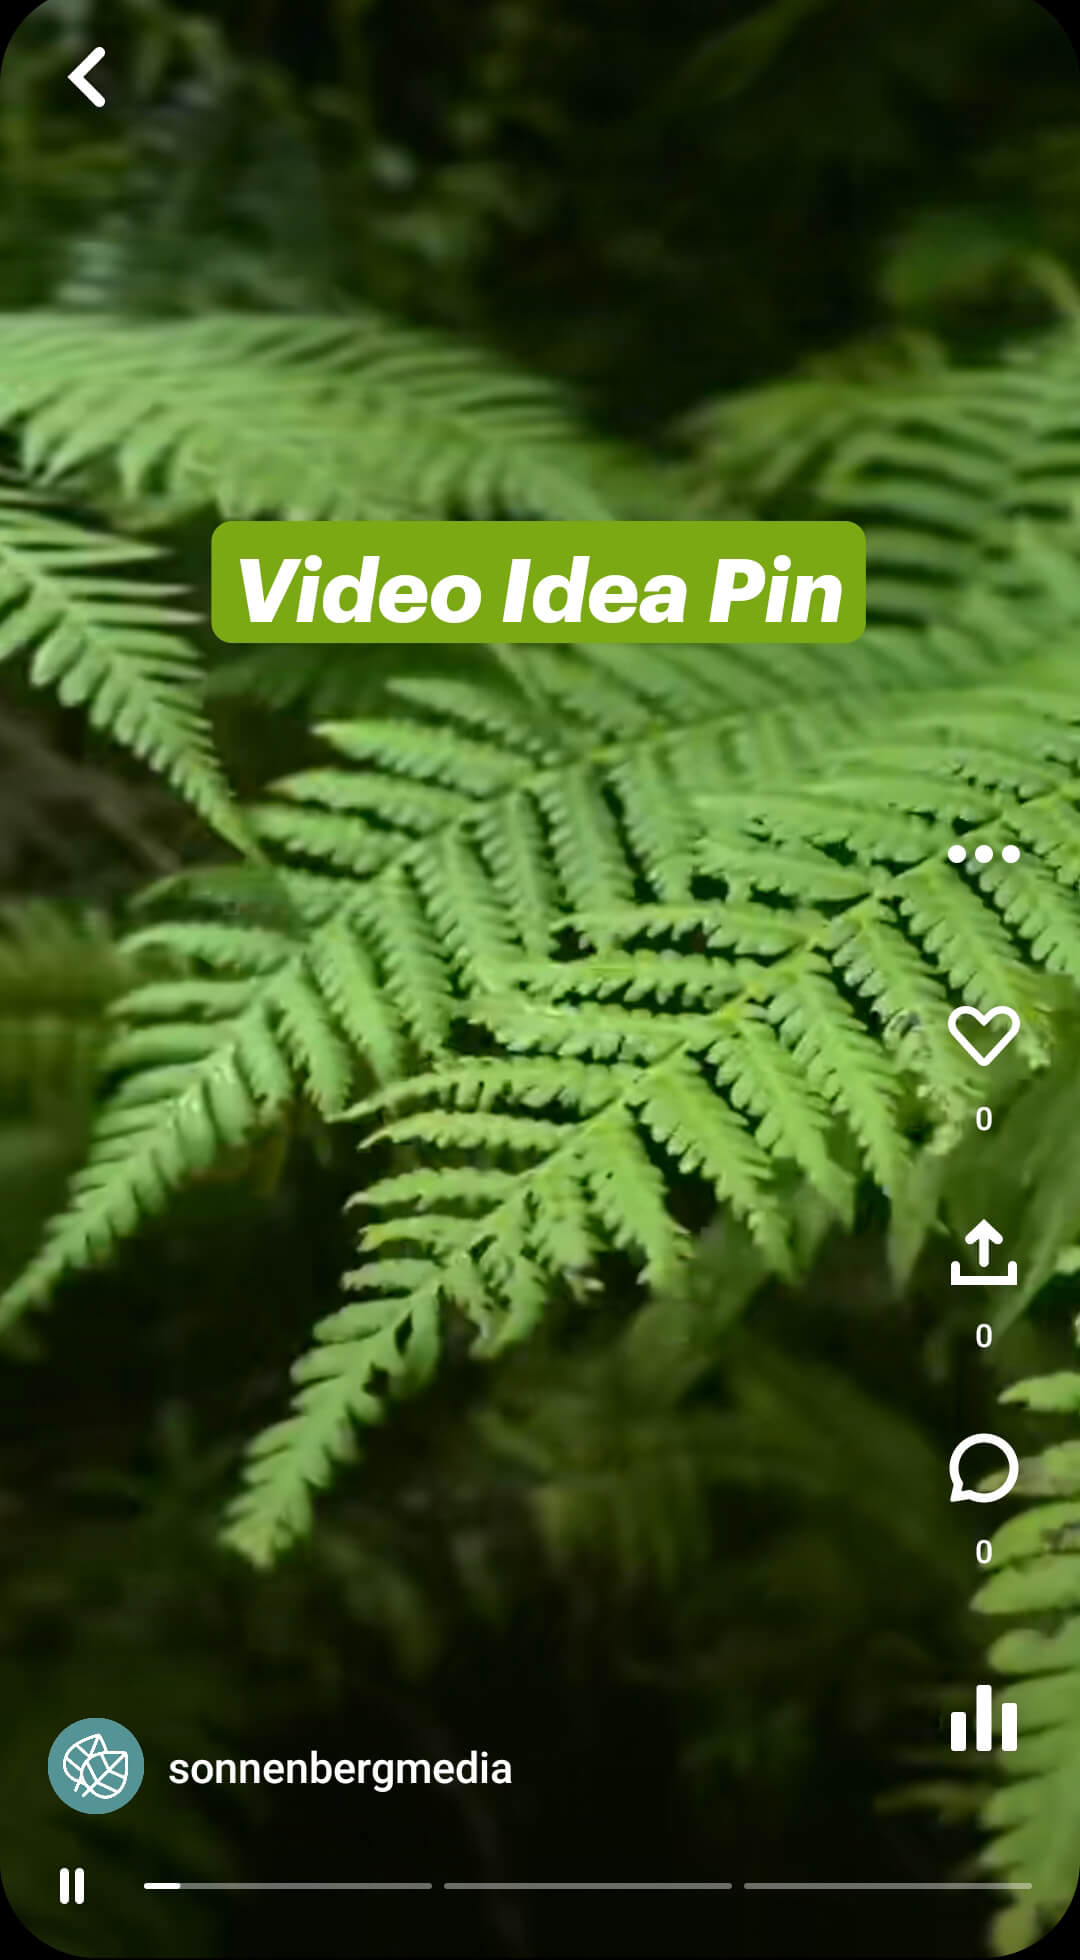 what-are-pinterest-idea-pins-sonnenbergmedia-video-pin-example-1